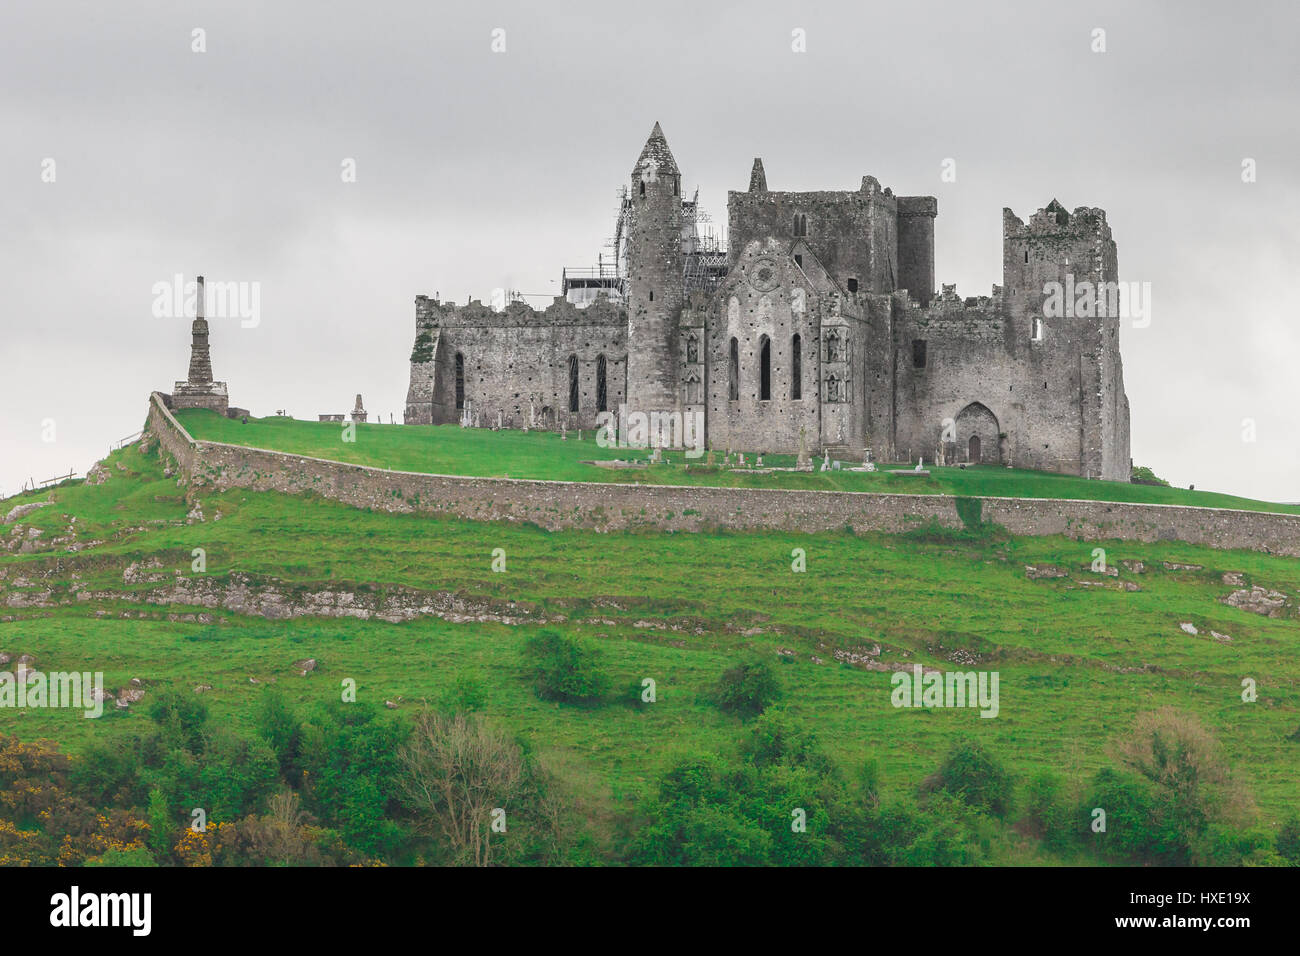 The Rock of Cashel,  also known as St. Patrick's Rock, located in County Tipperary, Ireland Stock Photo